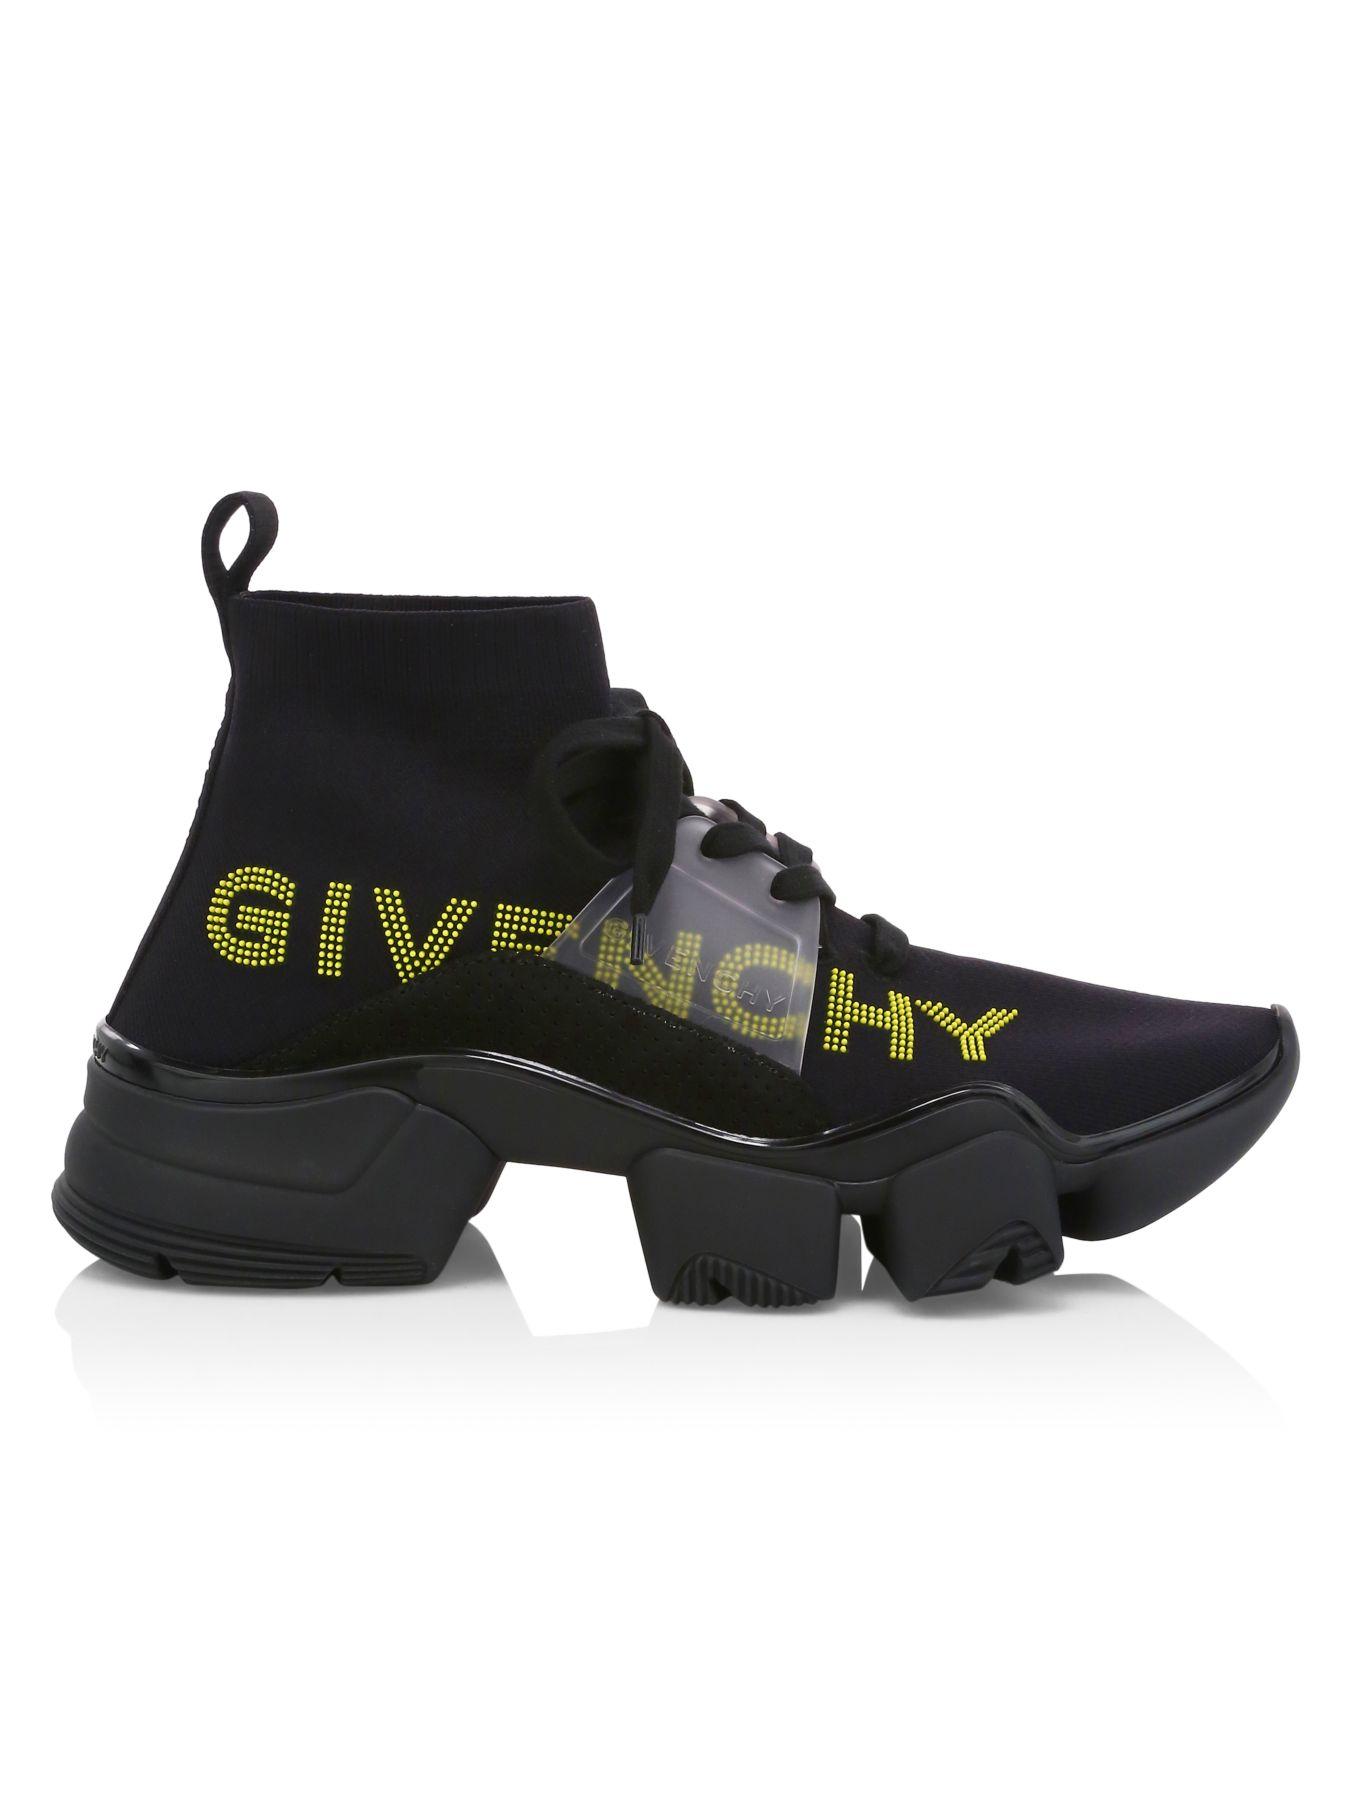 Givenchy Jaw Chunky Sock Sneakers in Black Yellow (Black) for Men - Lyst